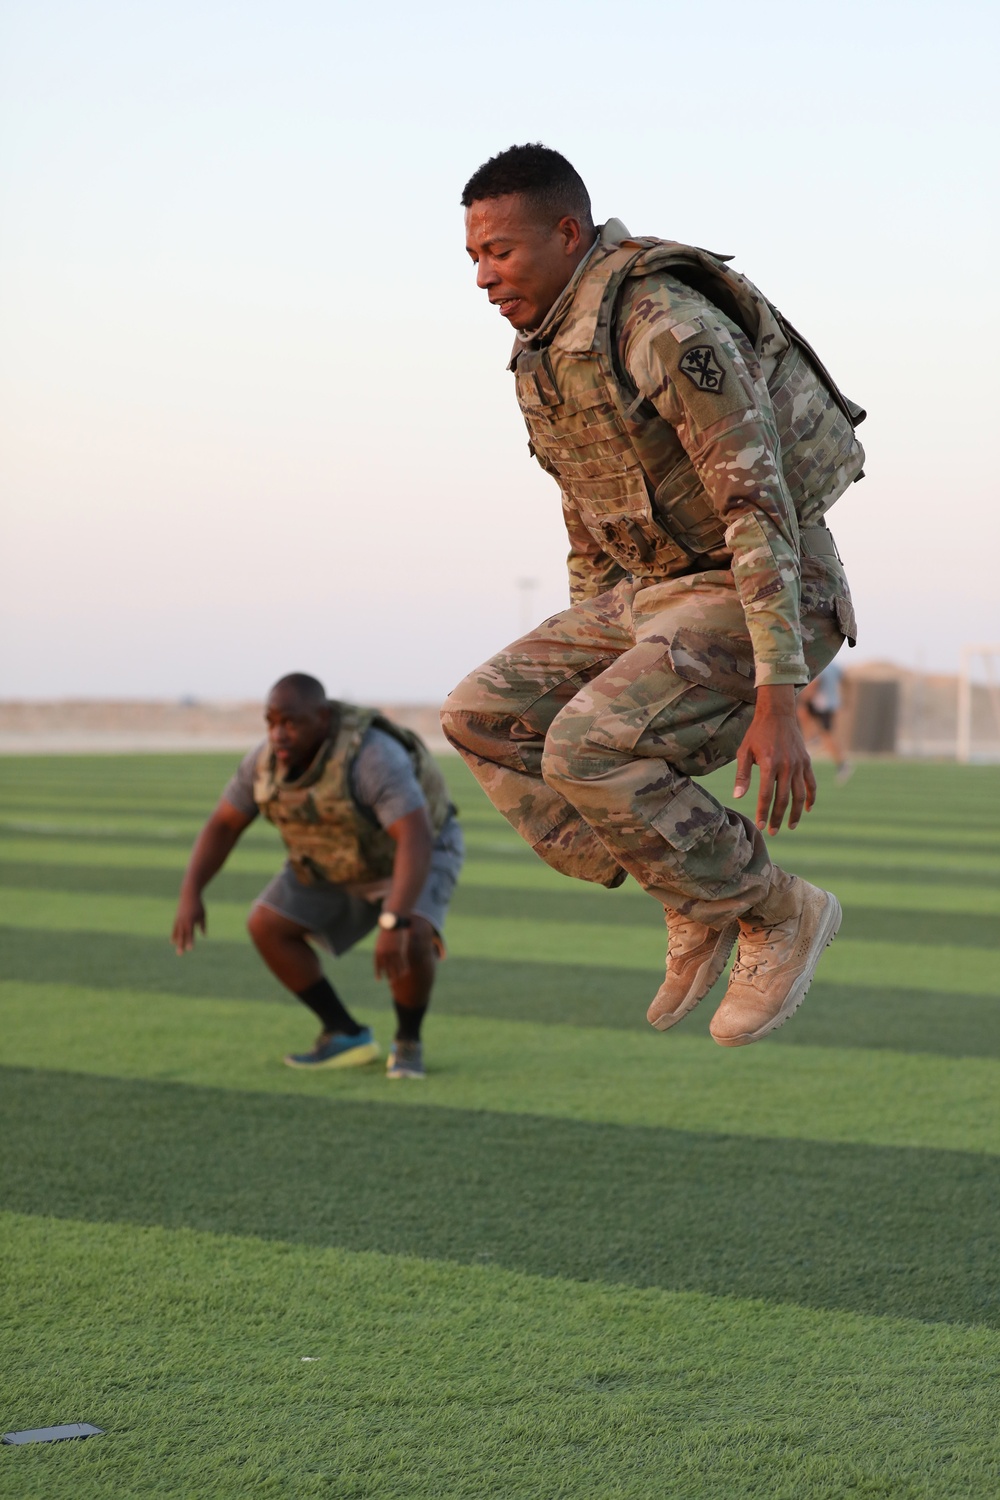 Soldiers conduct HIIT training as part of USO fun activity